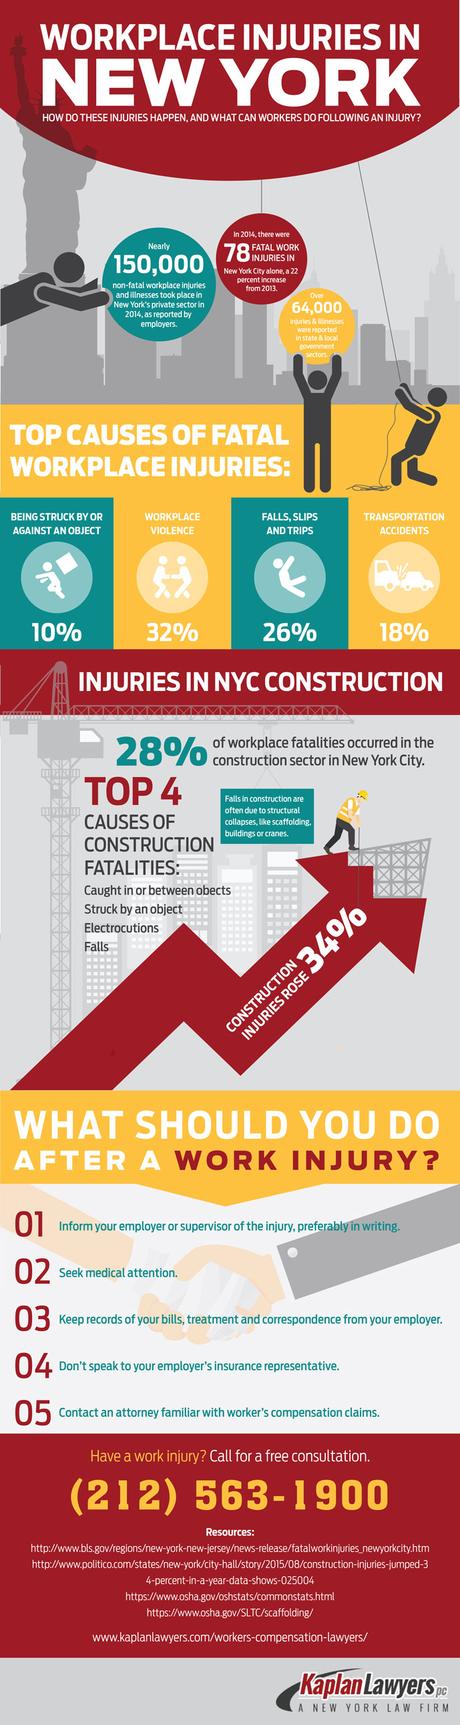 Workplace Injuries in New York